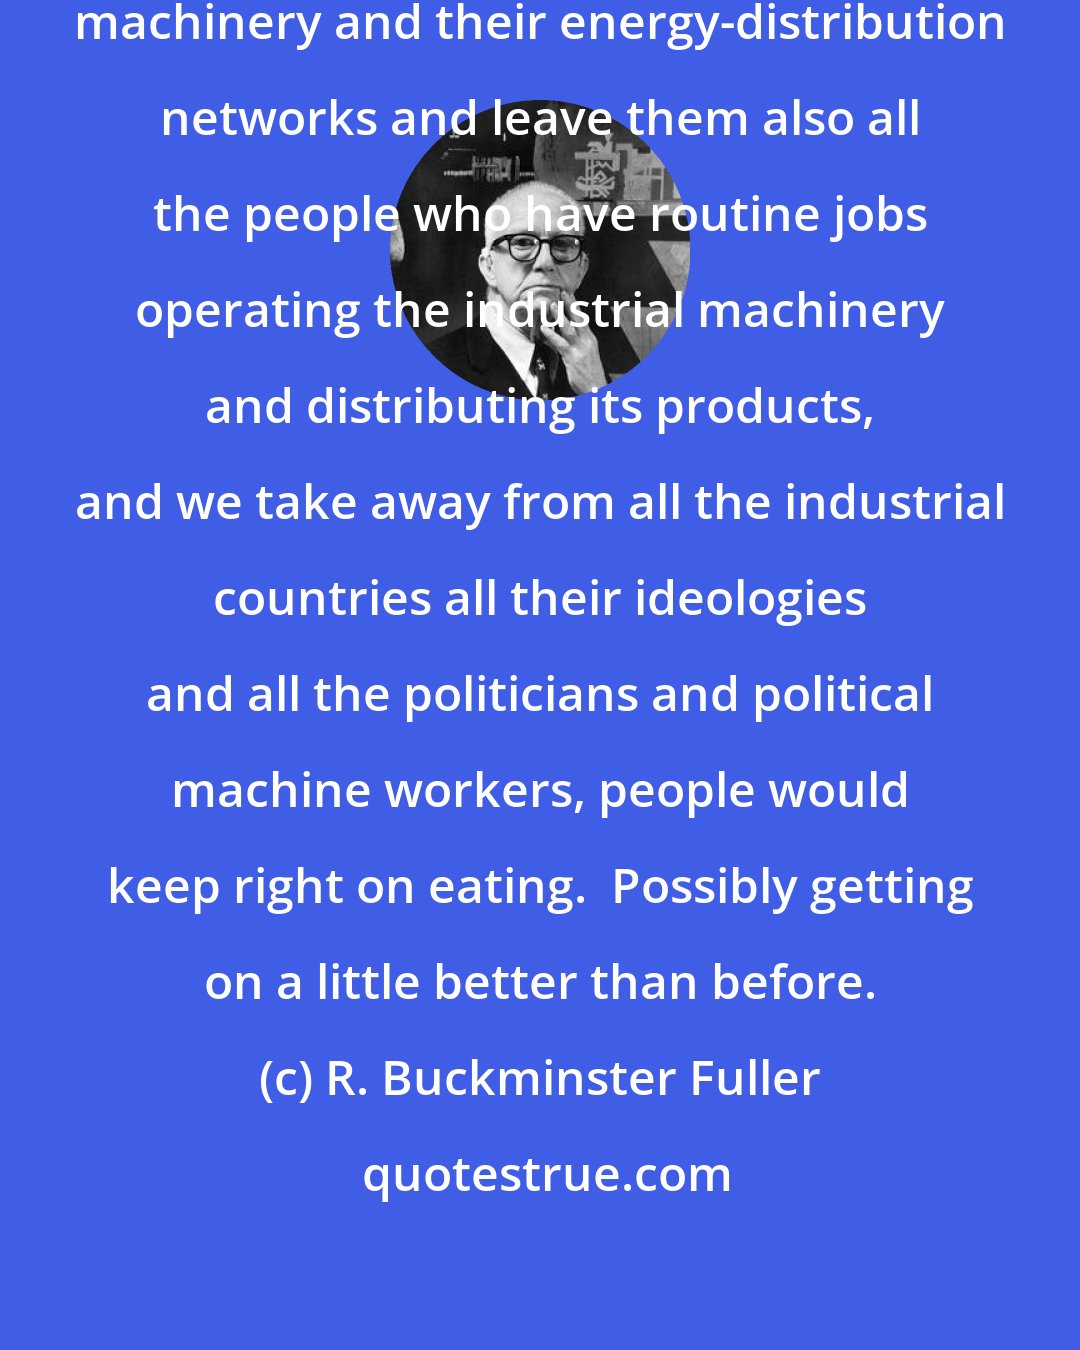 R. Buckminster Fuller: However, if we leave the industrial machinery and their energy-distribution networks and leave them also all the people who have routine jobs operating the industrial machinery and distributing its products, and we take away from all the industrial countries all their ideologies and all the politicians and political machine workers, people would keep right on eating.  Possibly getting on a little better than before.